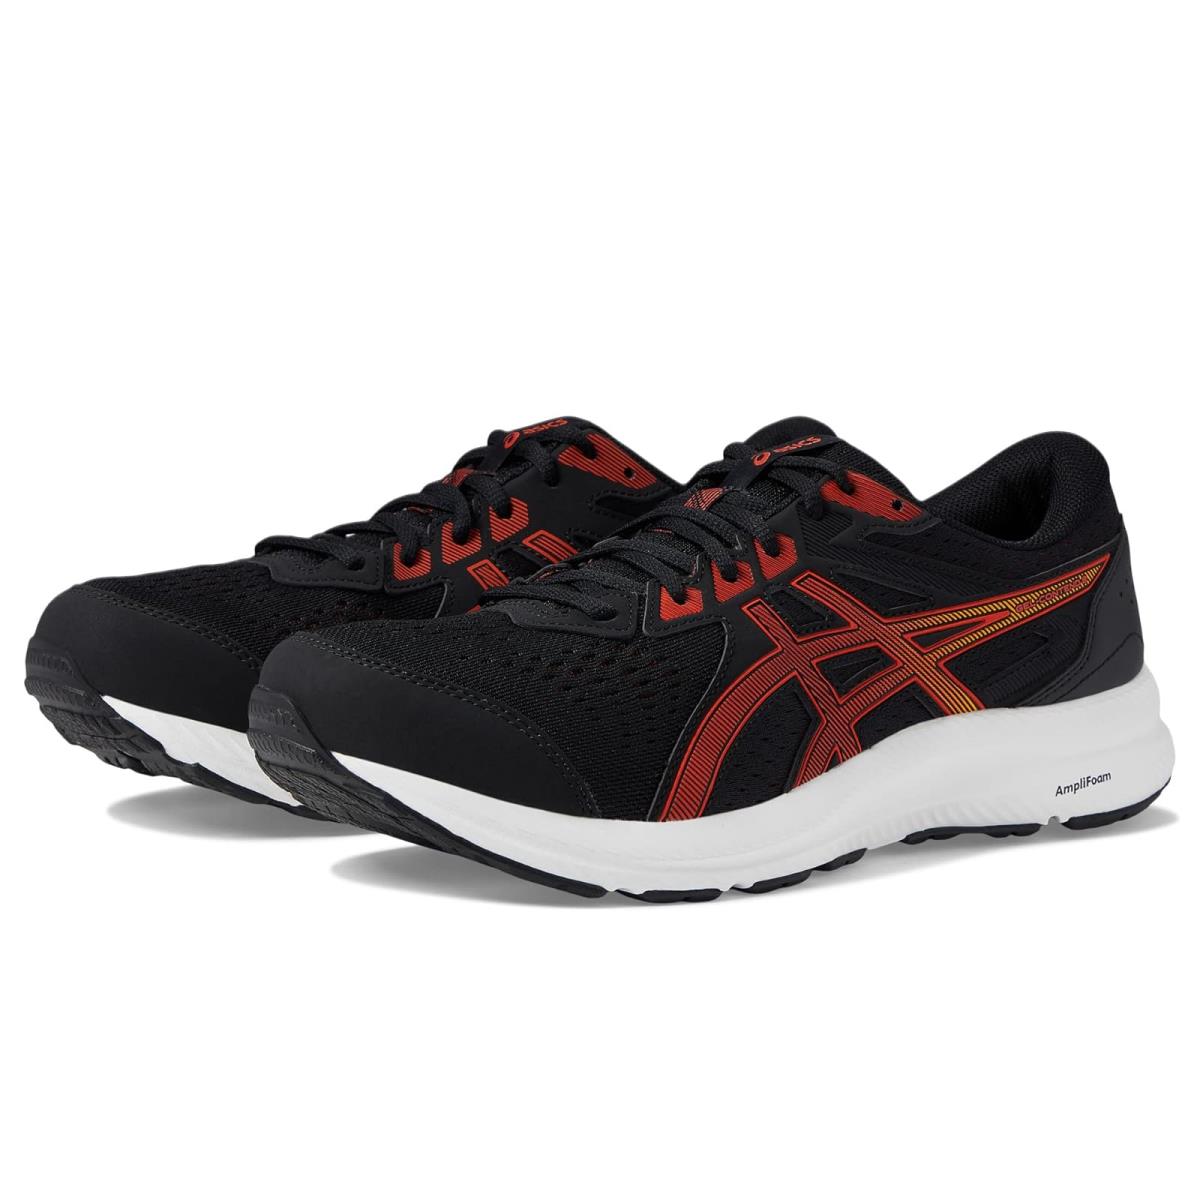 Man`s Sneakers Athletic Shoes Asics Gel-contend 8 Black/Cherry Tomato